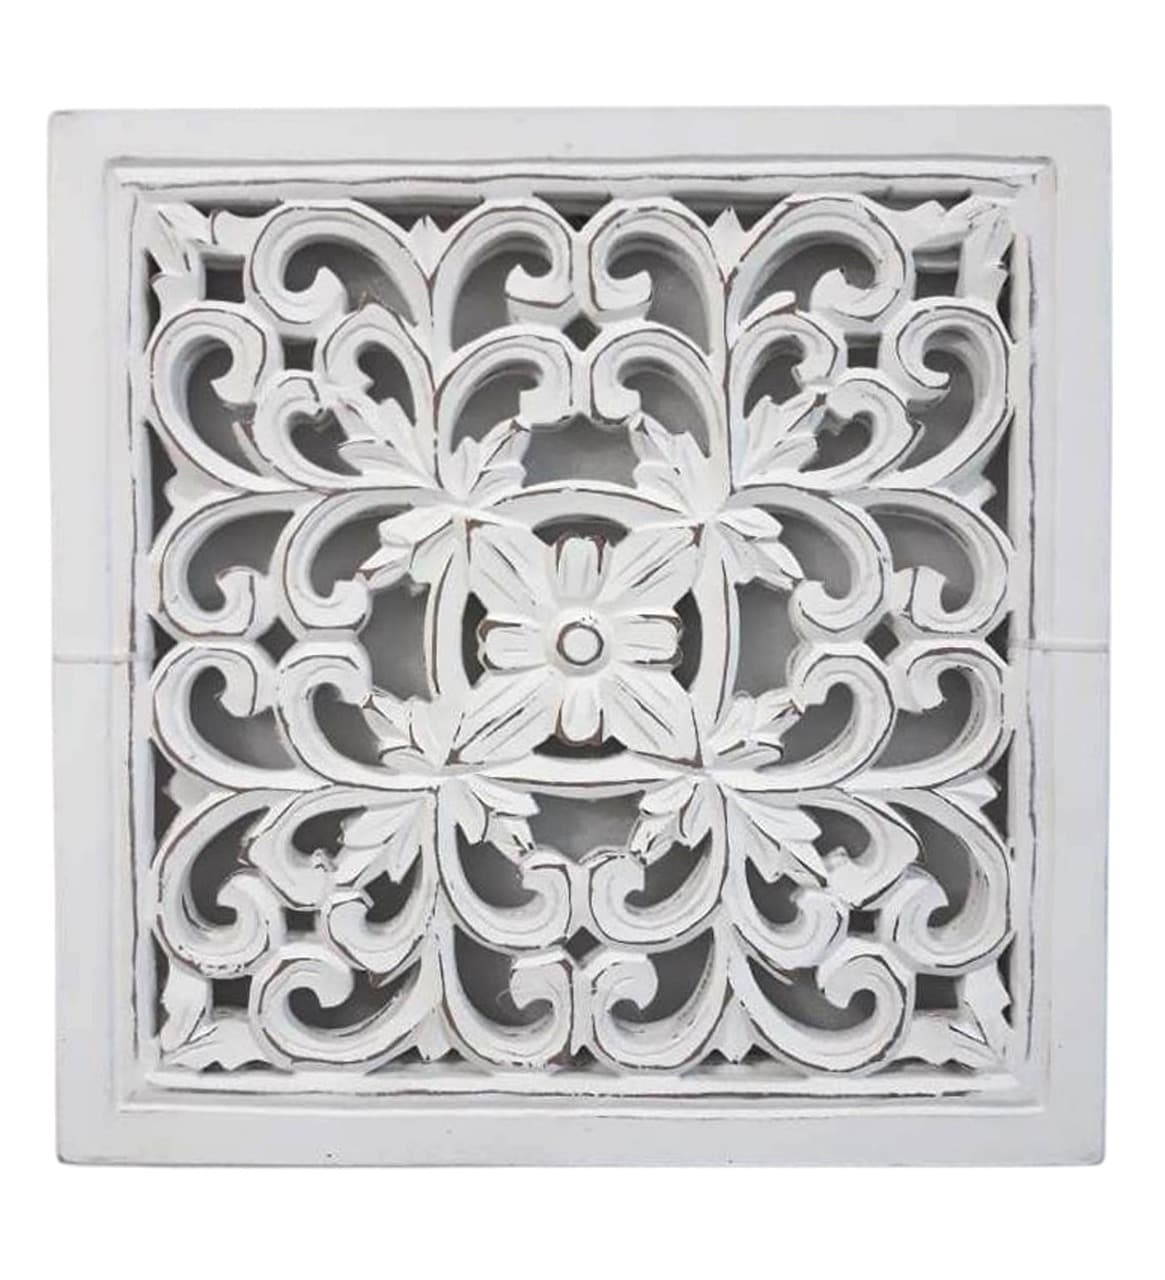 Hand Carve Wall Panel Hand Carved Wall Panel 16-in H x 16-in W Modern Hand-painted Limited Edition Wall Panel in White | - allen + roth 4359249